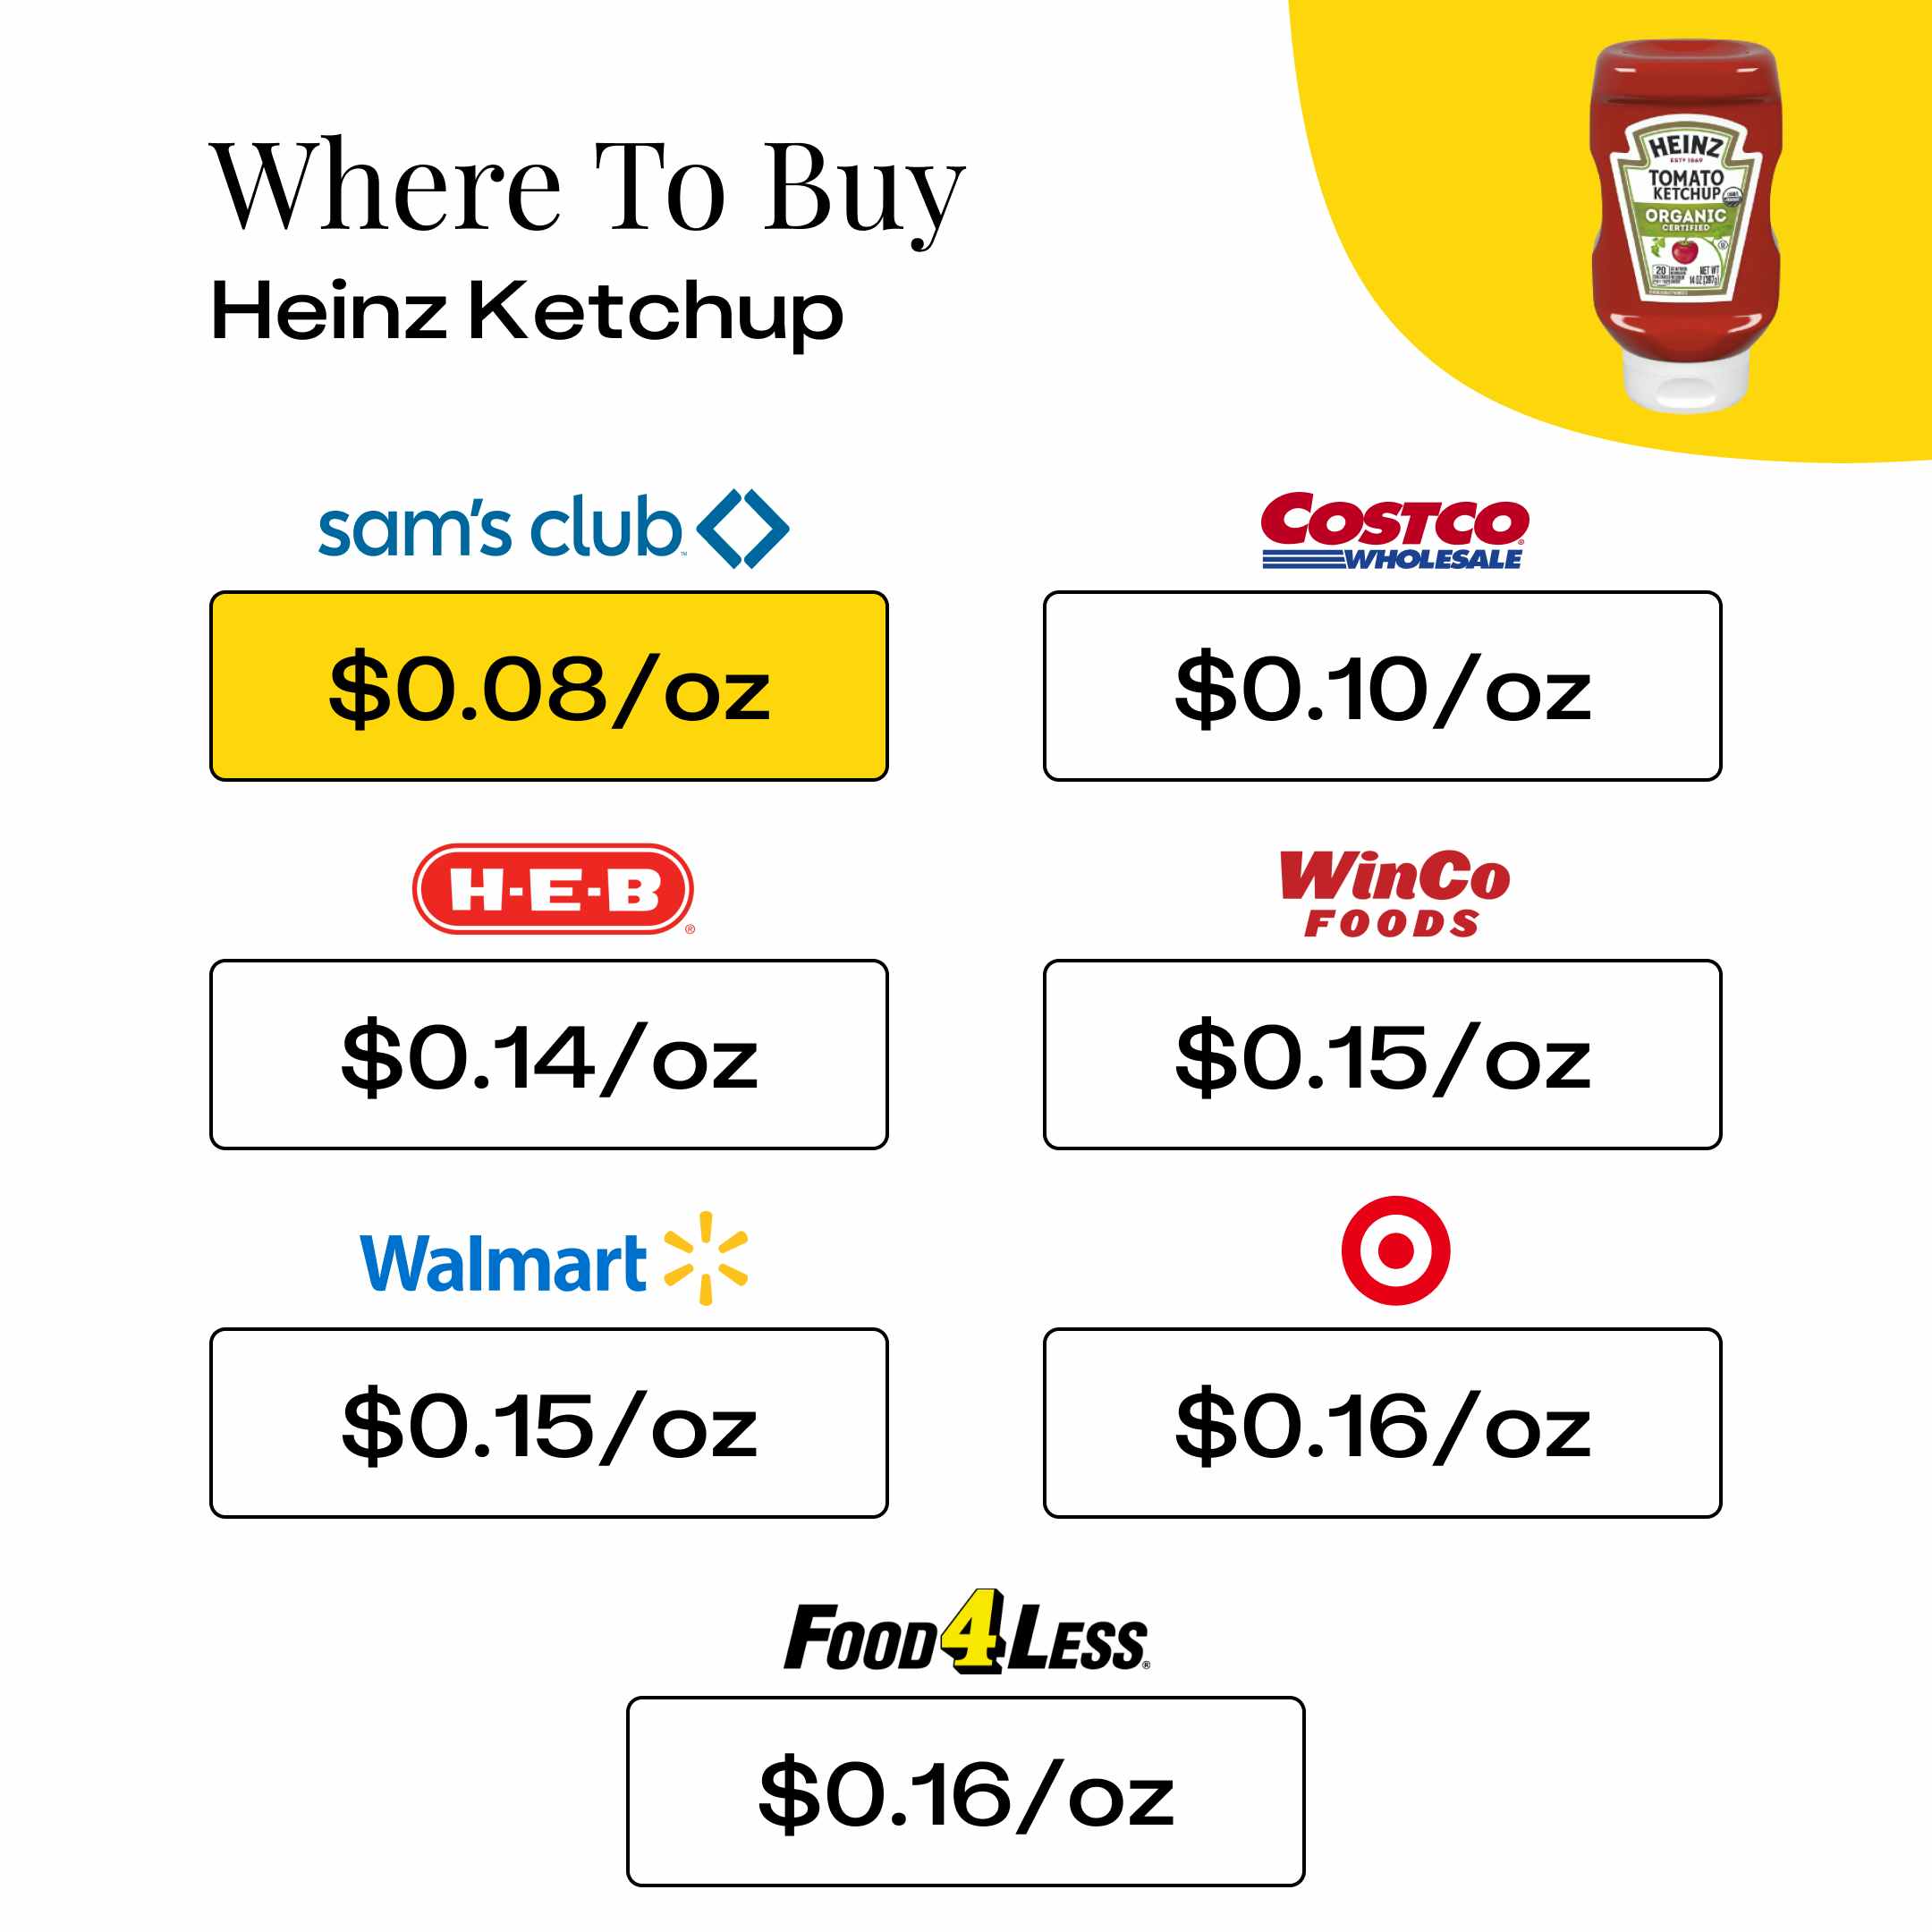 Where To Buy Heinz Ketchup